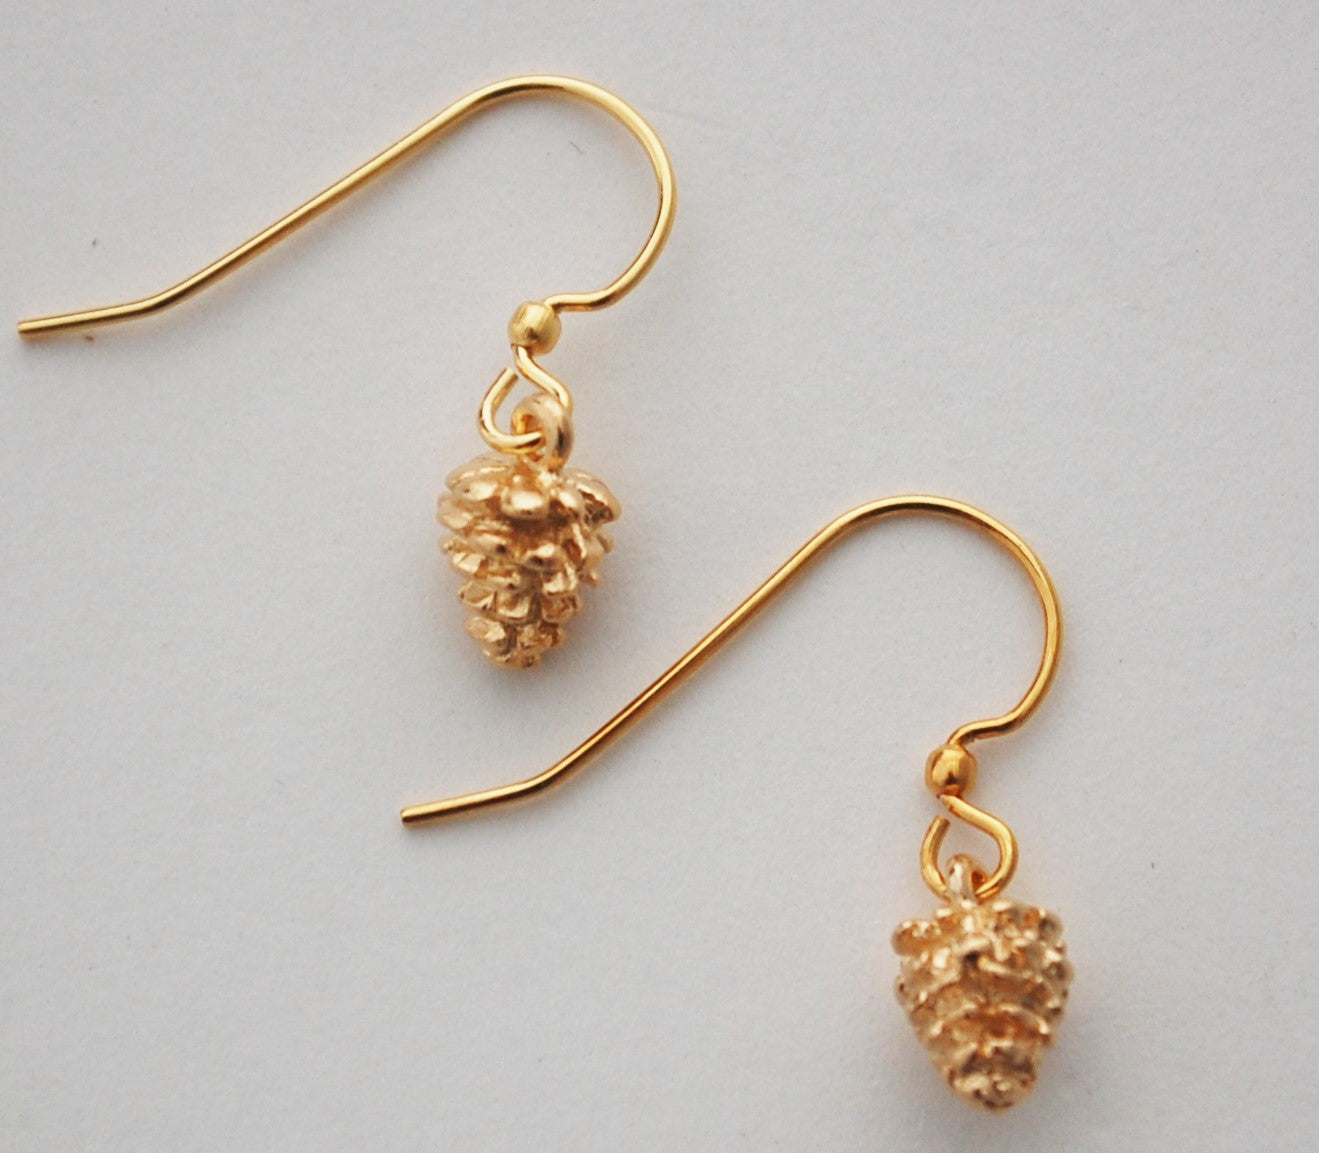 Pinecone Dangle Earrings - 14 kt Gold over Sterling Silver - Moon Room Shop and Wellness